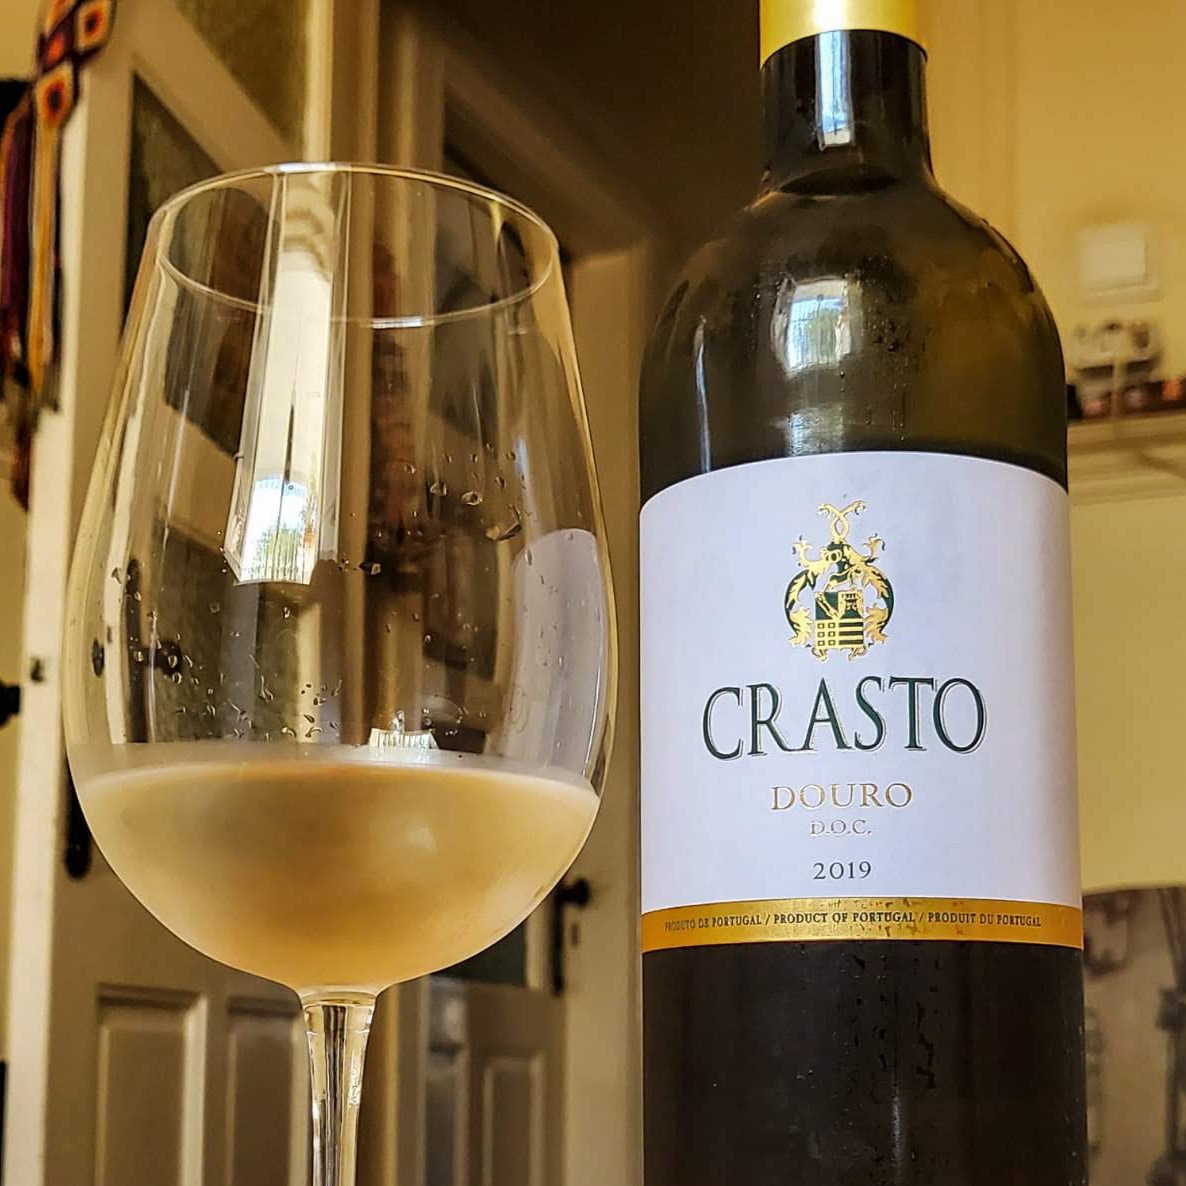 Crasto White 2019. 😋 This wine is made from traditional Douro white grape varieties - Viosinho, Rabigato e Gouveio.  💛🙌🏻✨
👉🏻 Be sure to look for your favourite #wine in your usual #restaurant or #wineshop. #StaySafe 🍀
#Douro #CrastoBranco #CrastoWhite #Vinhos #Wines #Wein